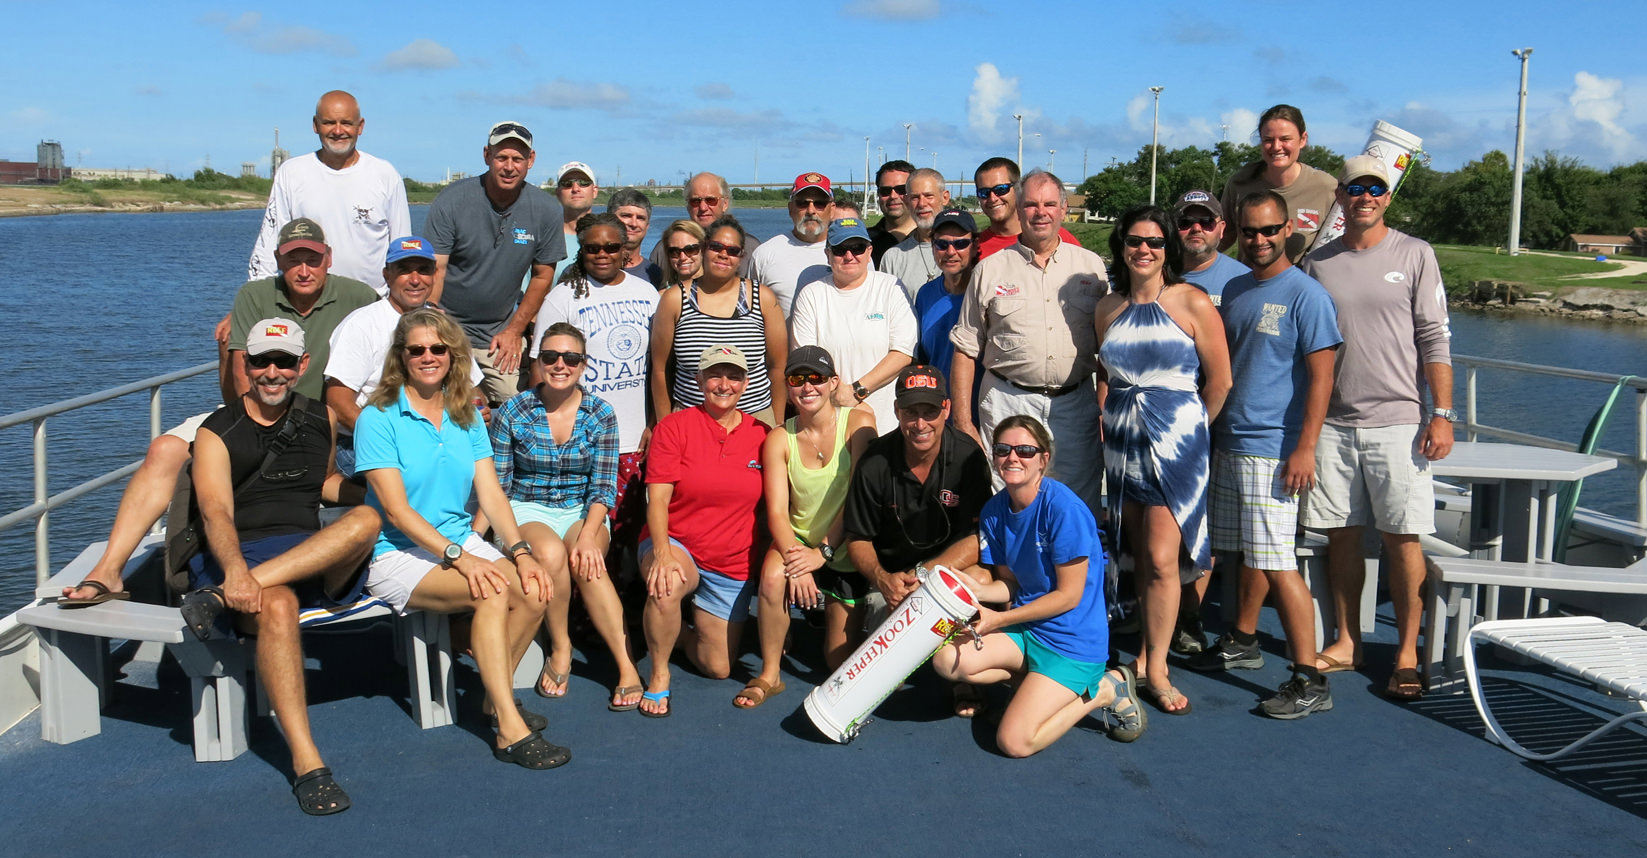 Group photo of participants from the 2015 Lionfish Invitational on the top deck of M/V Fling